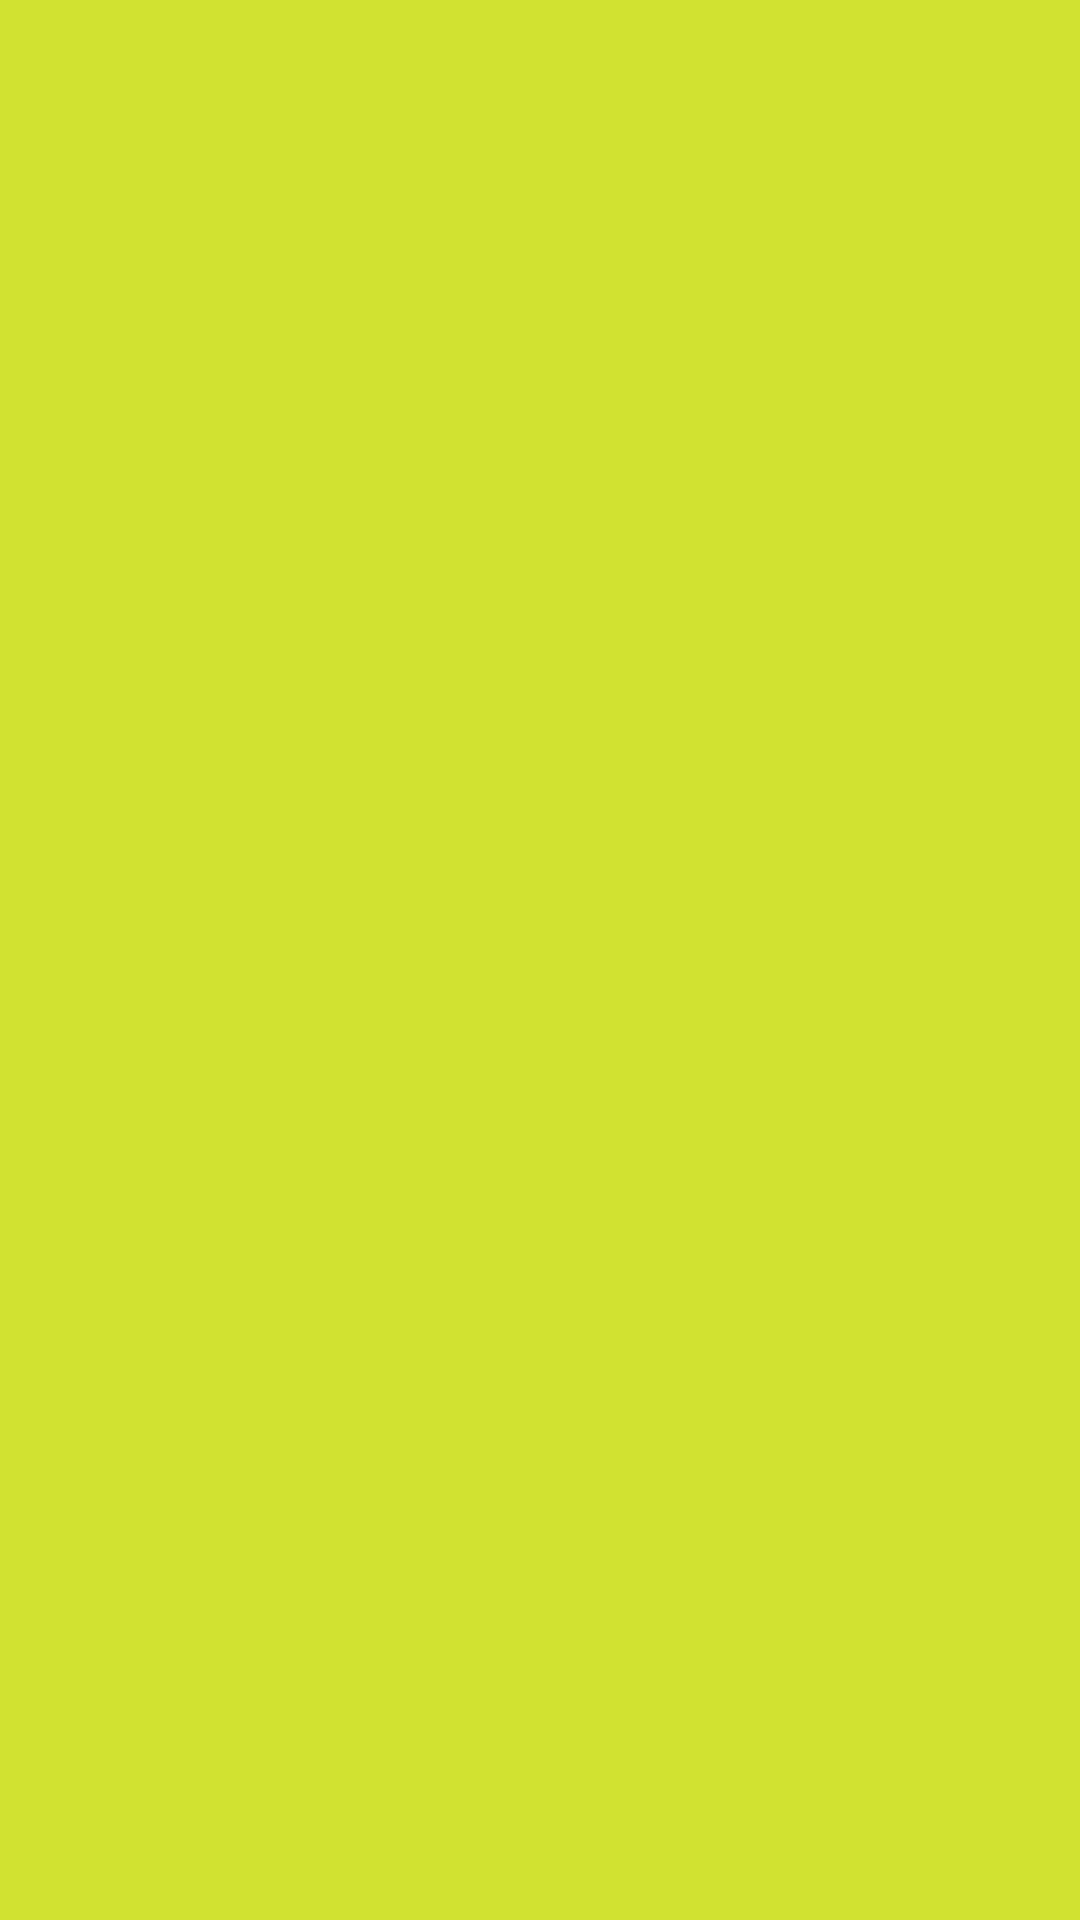 1080x1920 Pear Solid Color Background